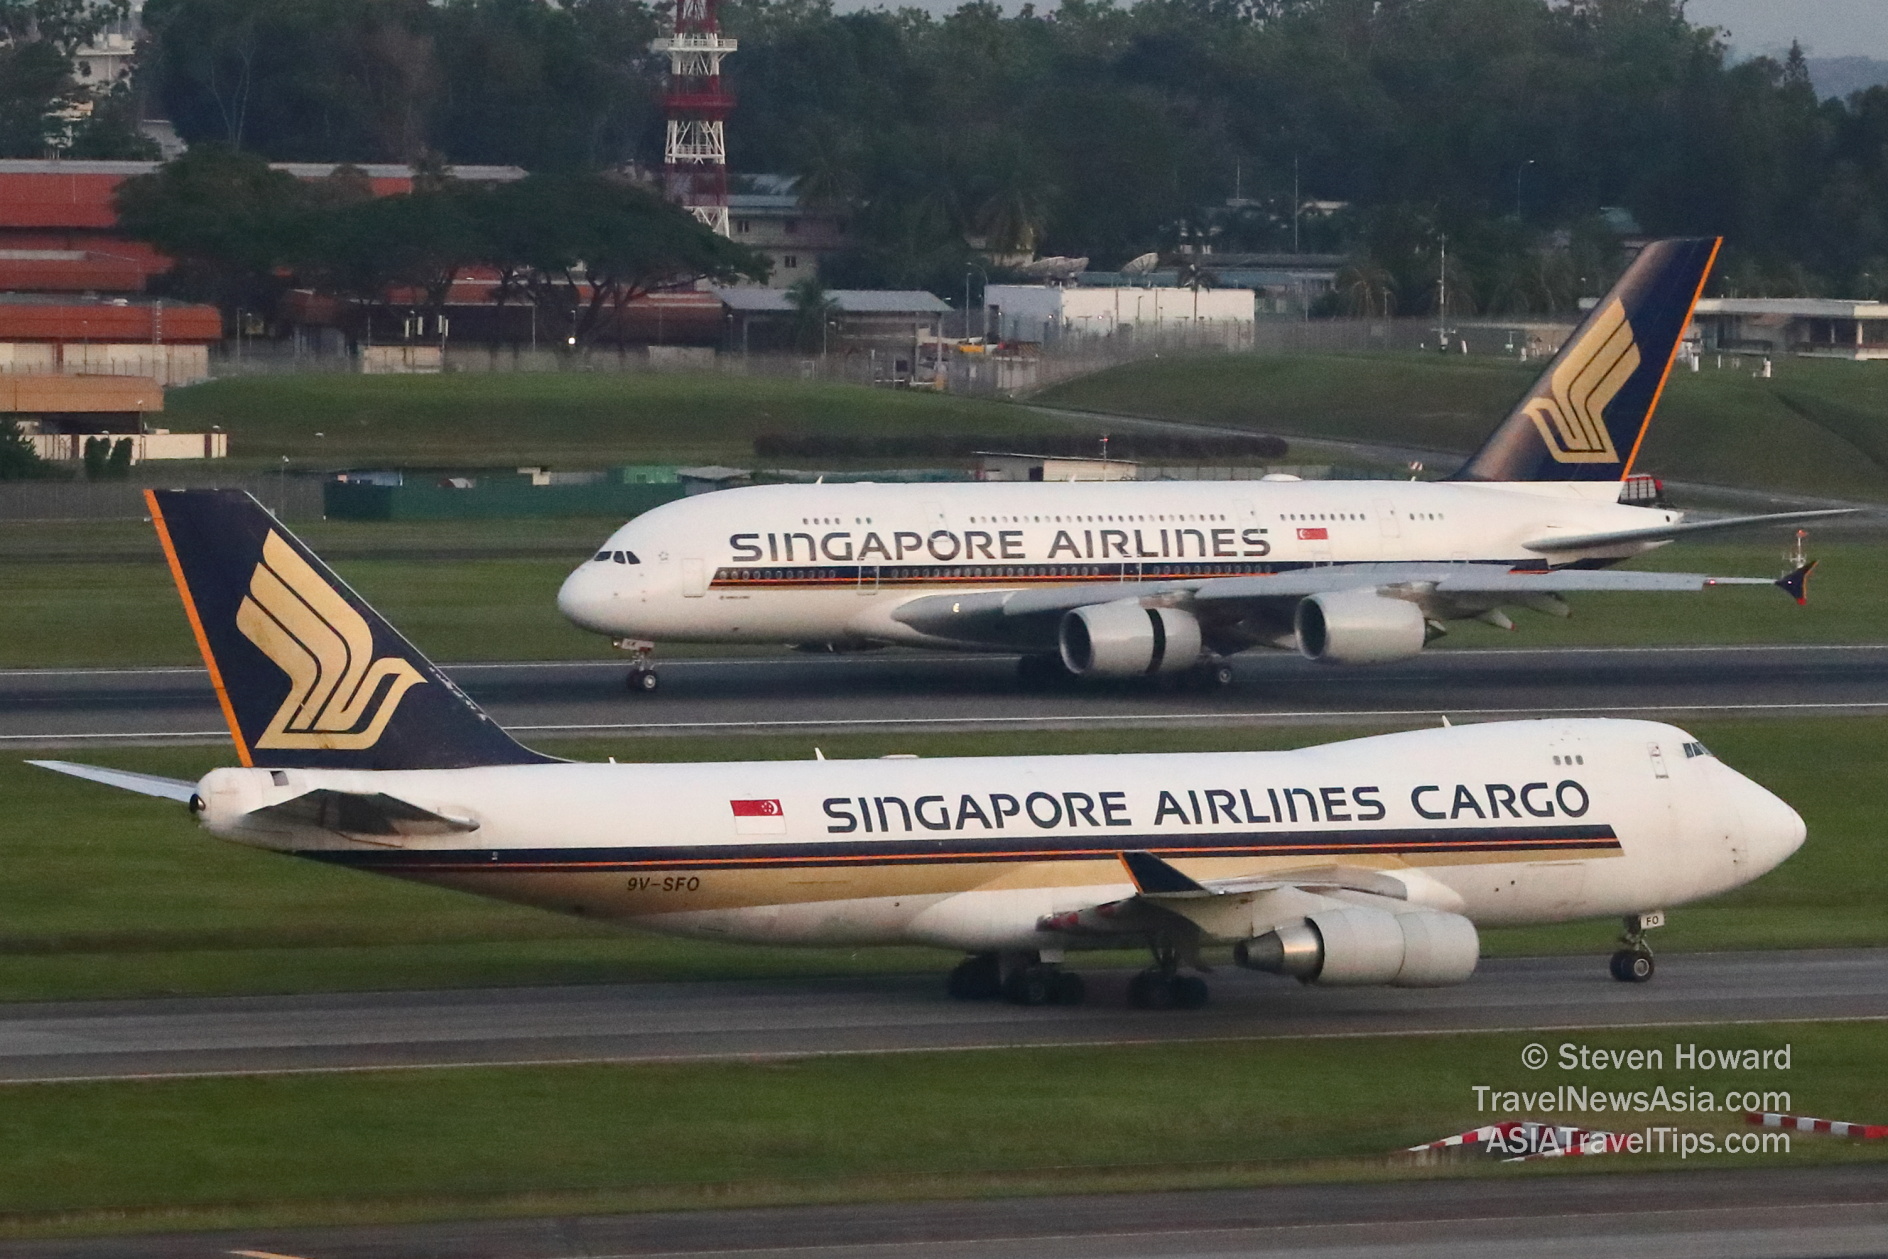 Singapore Airlines passenger and cargo aircraft. Picture by Steven Howard of TravelNewsAsia.com Click to enlarge.